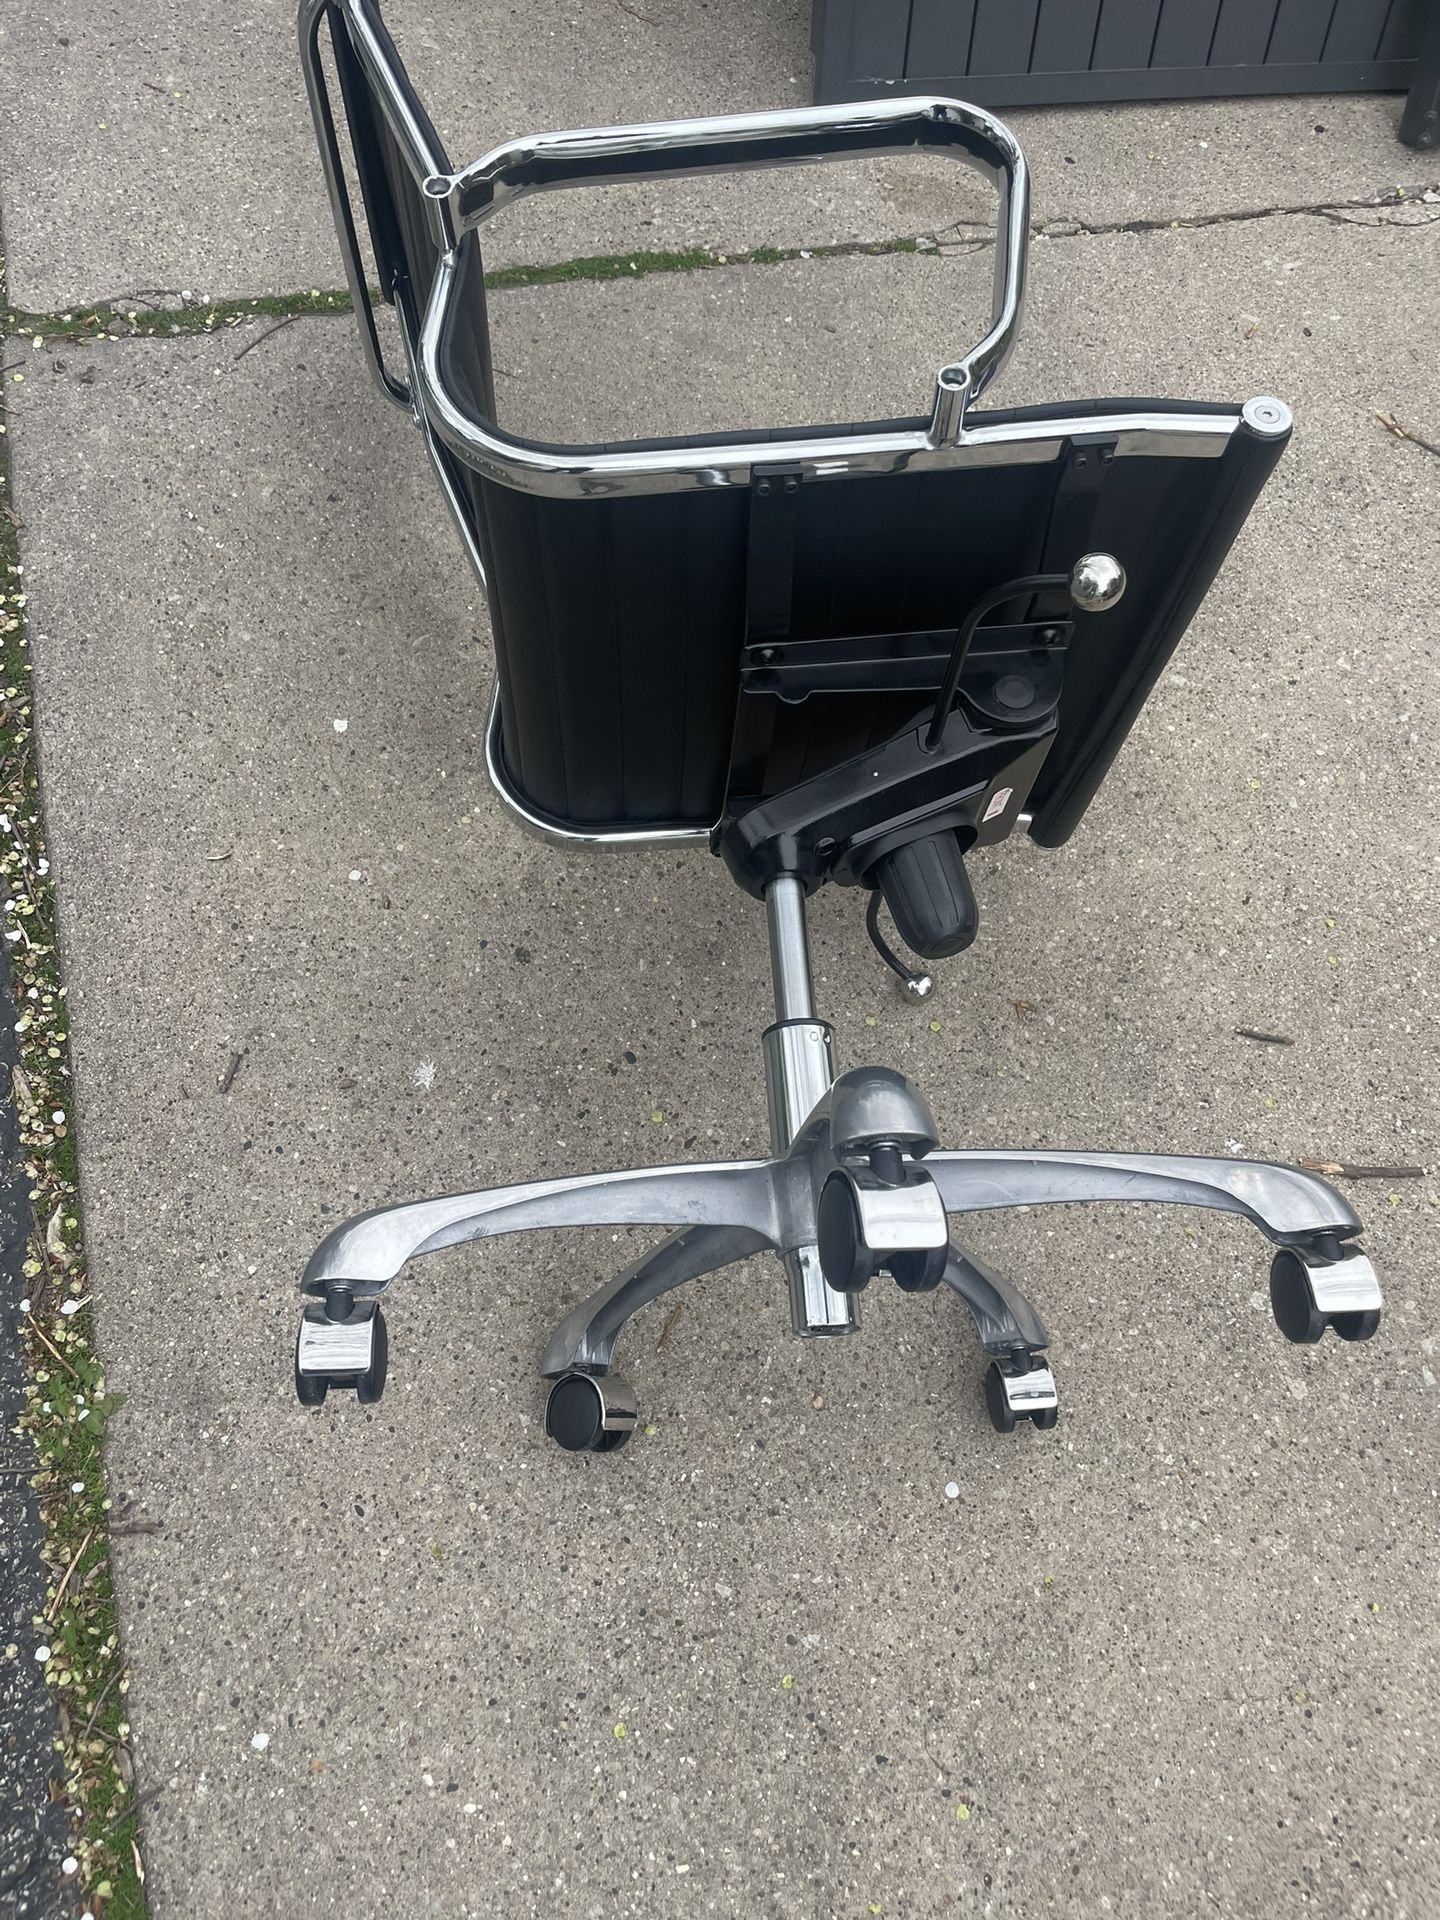 Chrome and Leather Swivel Desk Chair, adjustable, high back, like new, $45